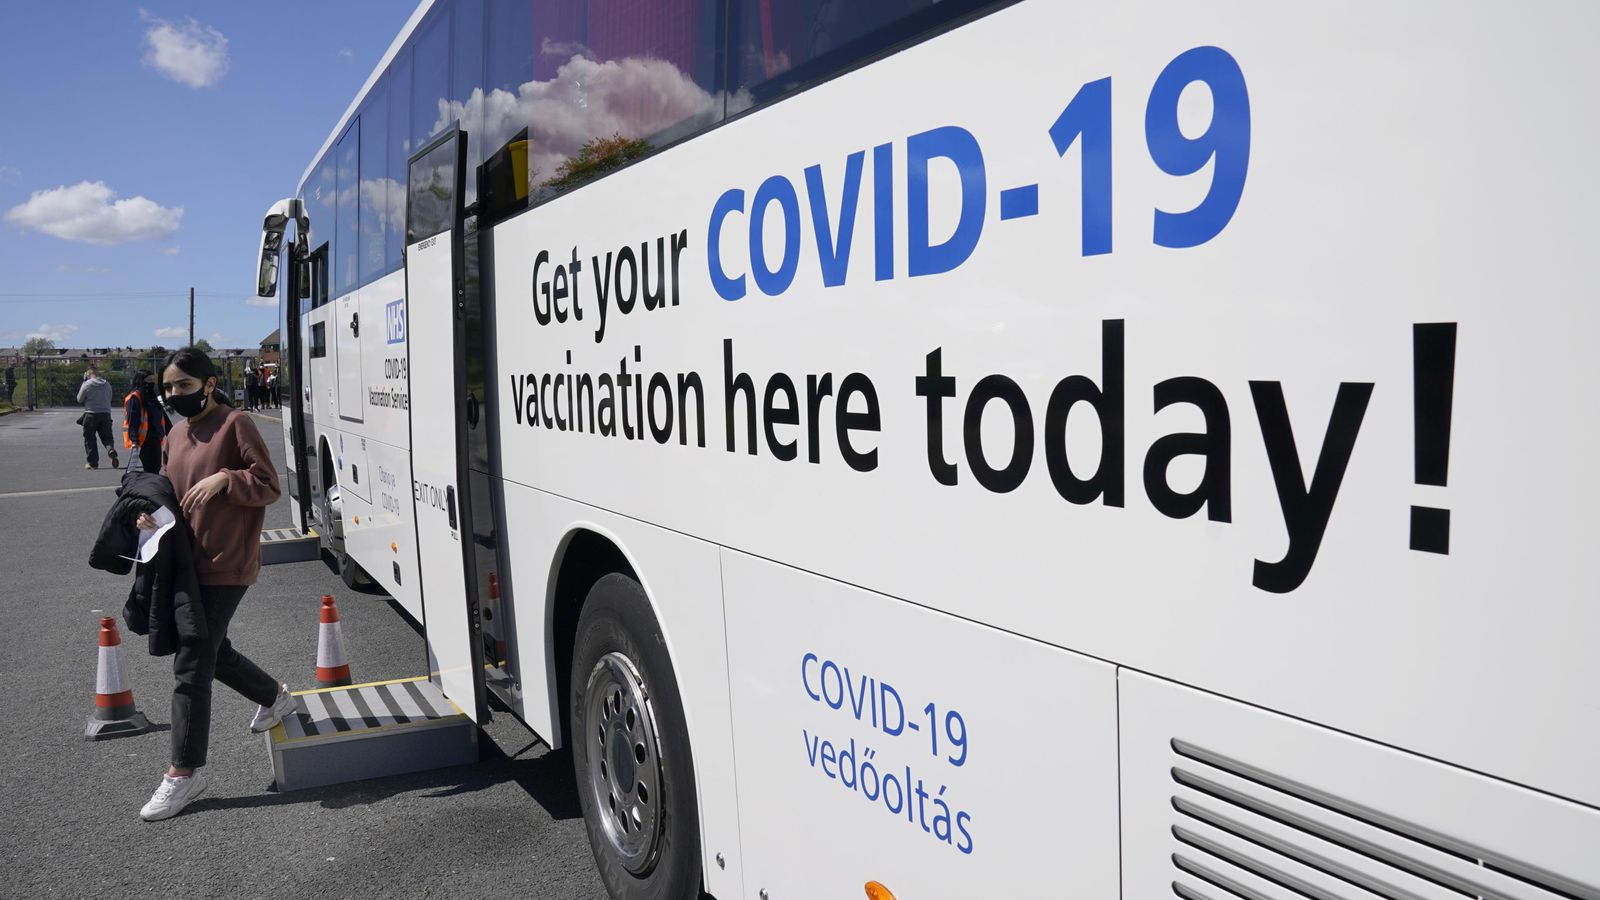 COVID-19: Almost 3,000 cases of Indian variant recorded in UK as surge testing and vaccinations extended